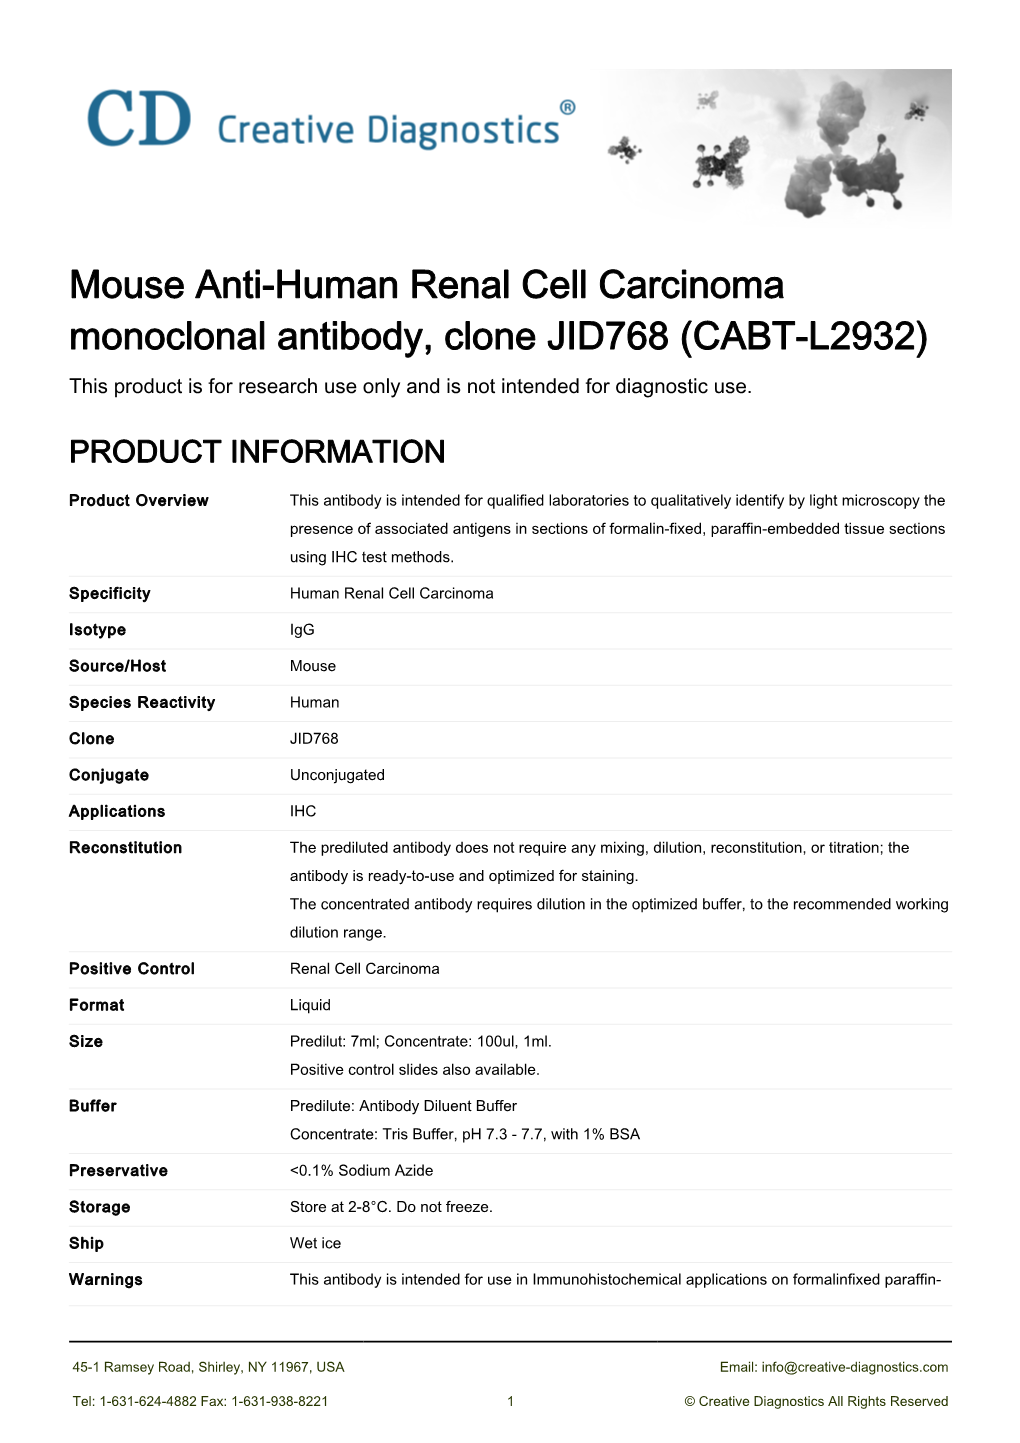 Mouse Anti-Human Renal Cell Carcinoma Monoclonal Antibody, Clone JID768 (CABT-L2932) This Product Is for Research Use Only and Is Not Intended for Diagnostic Use